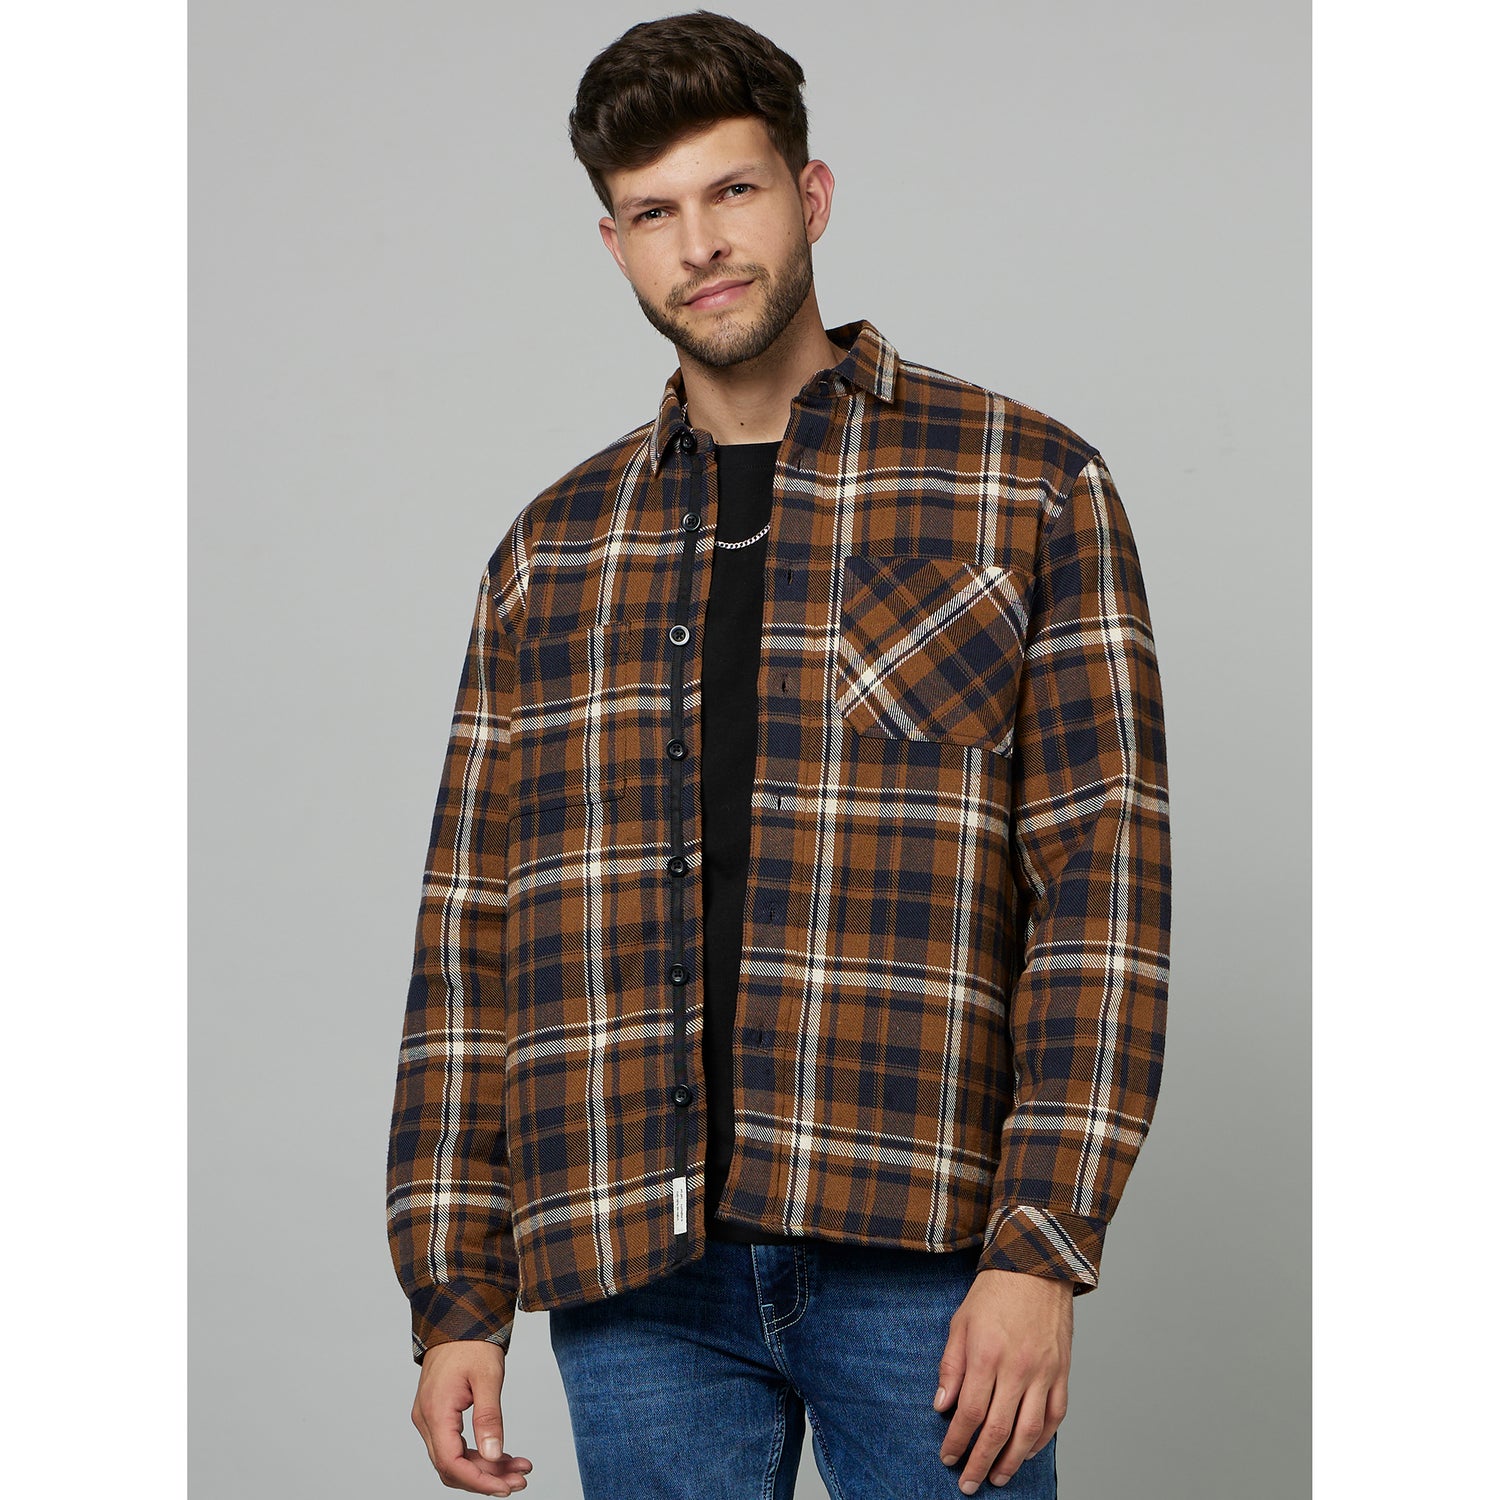 Brown Checked Bomber Jacket (FUPADCHK)